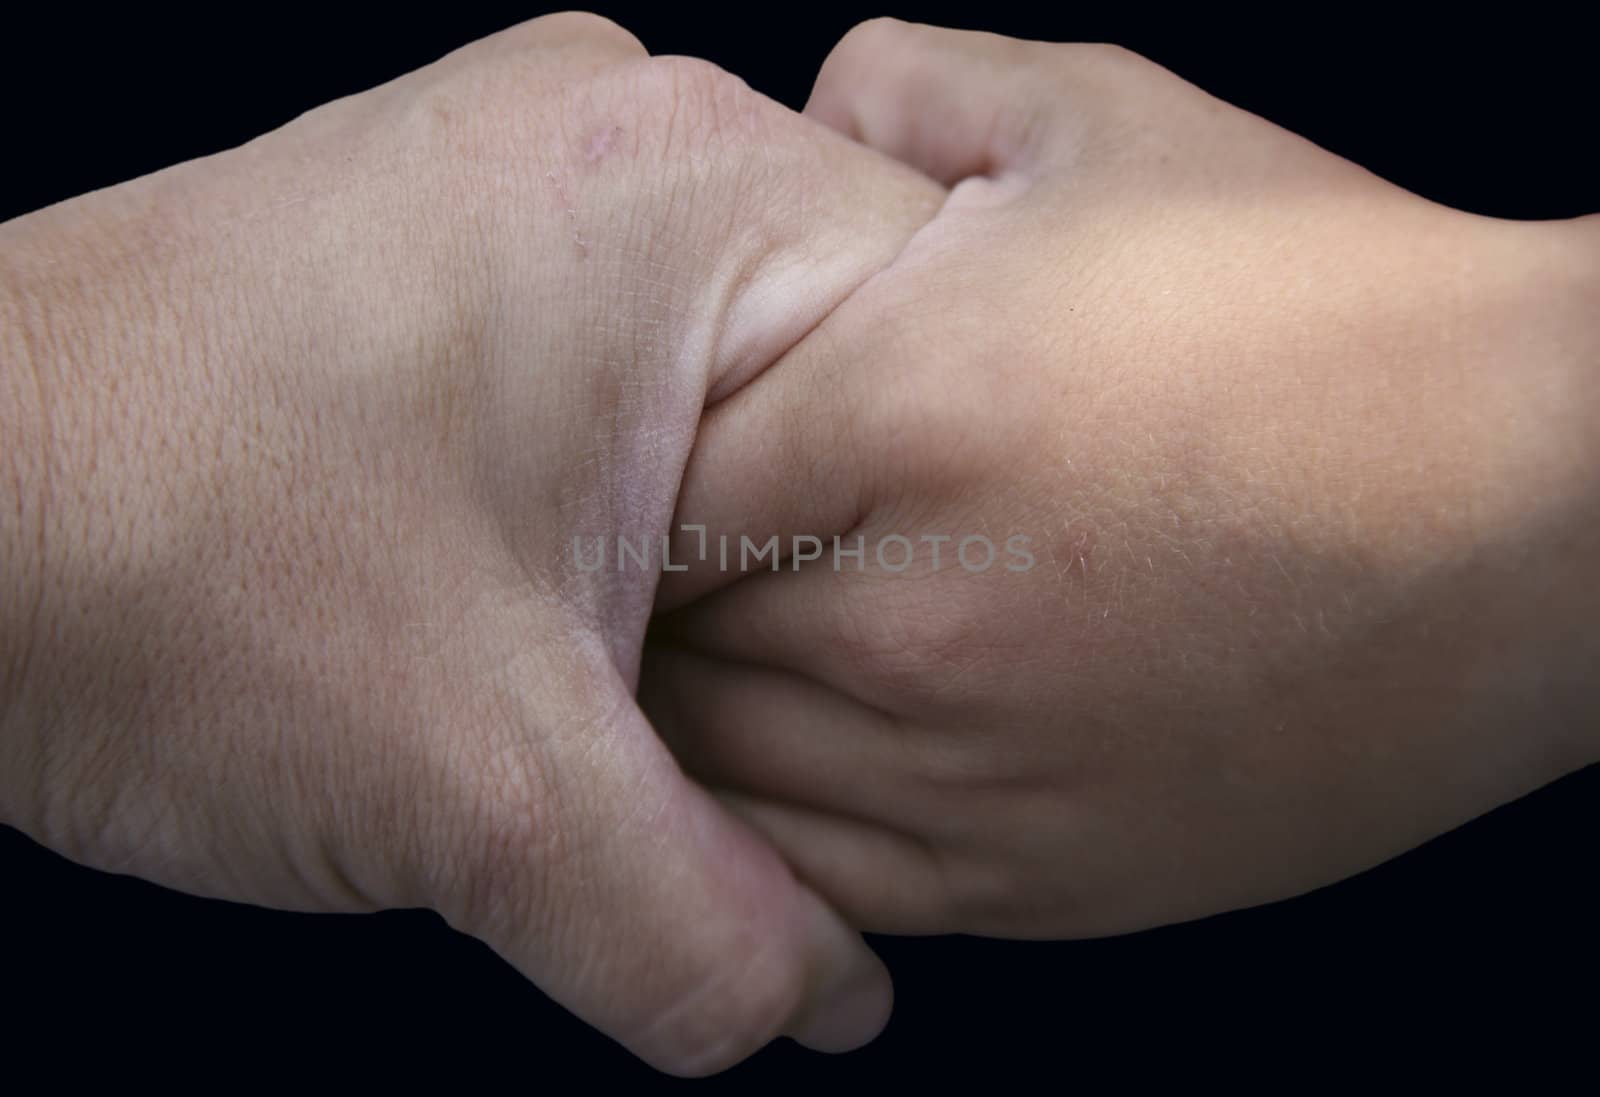 Handshake between mom and child by scrappinstacy